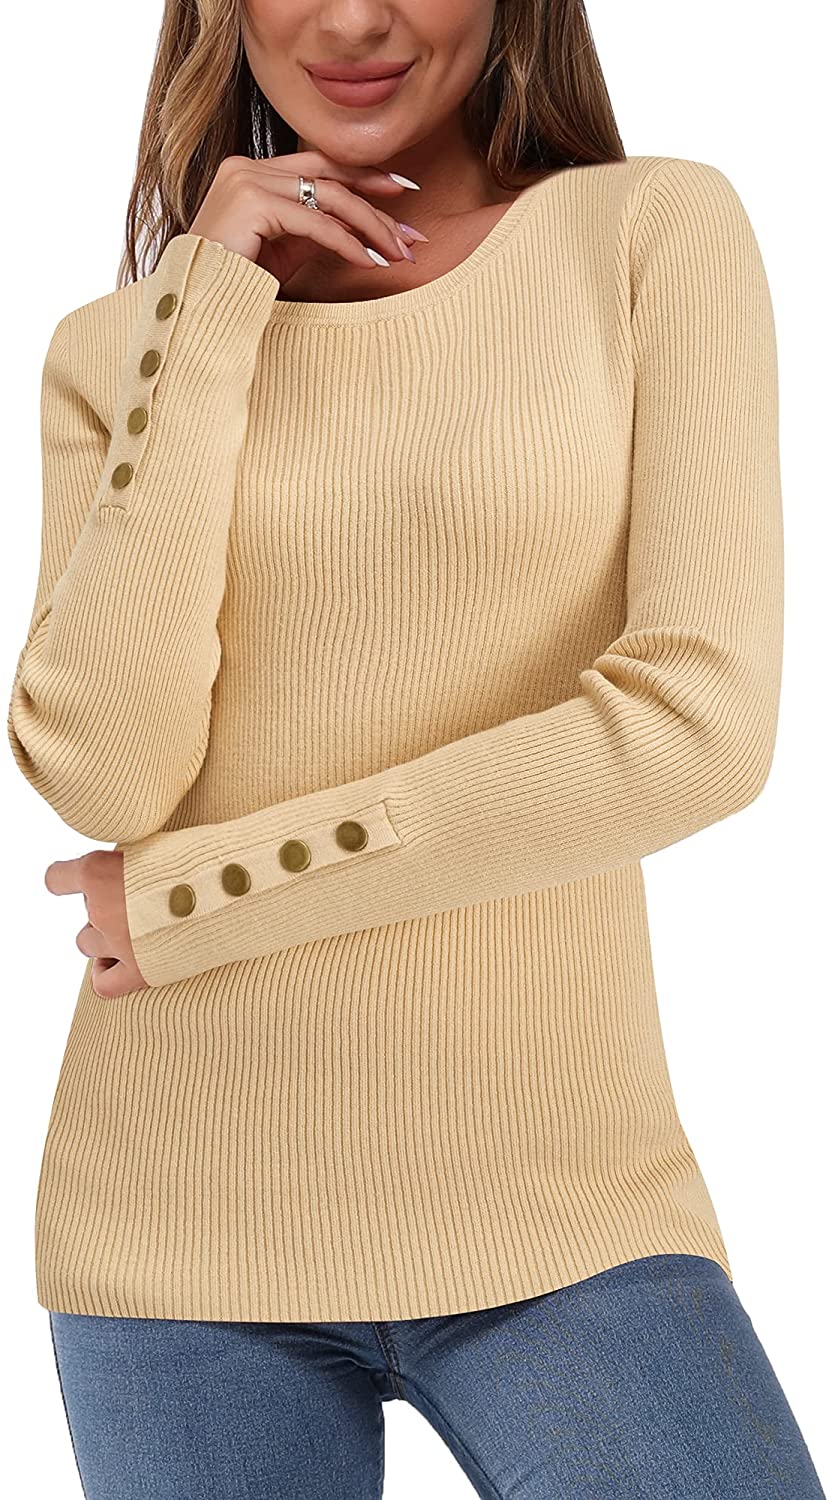 Newshows Women's Solid Long Sleeve Knit Crew Neck Button Stretch Casual Pullover Sweater